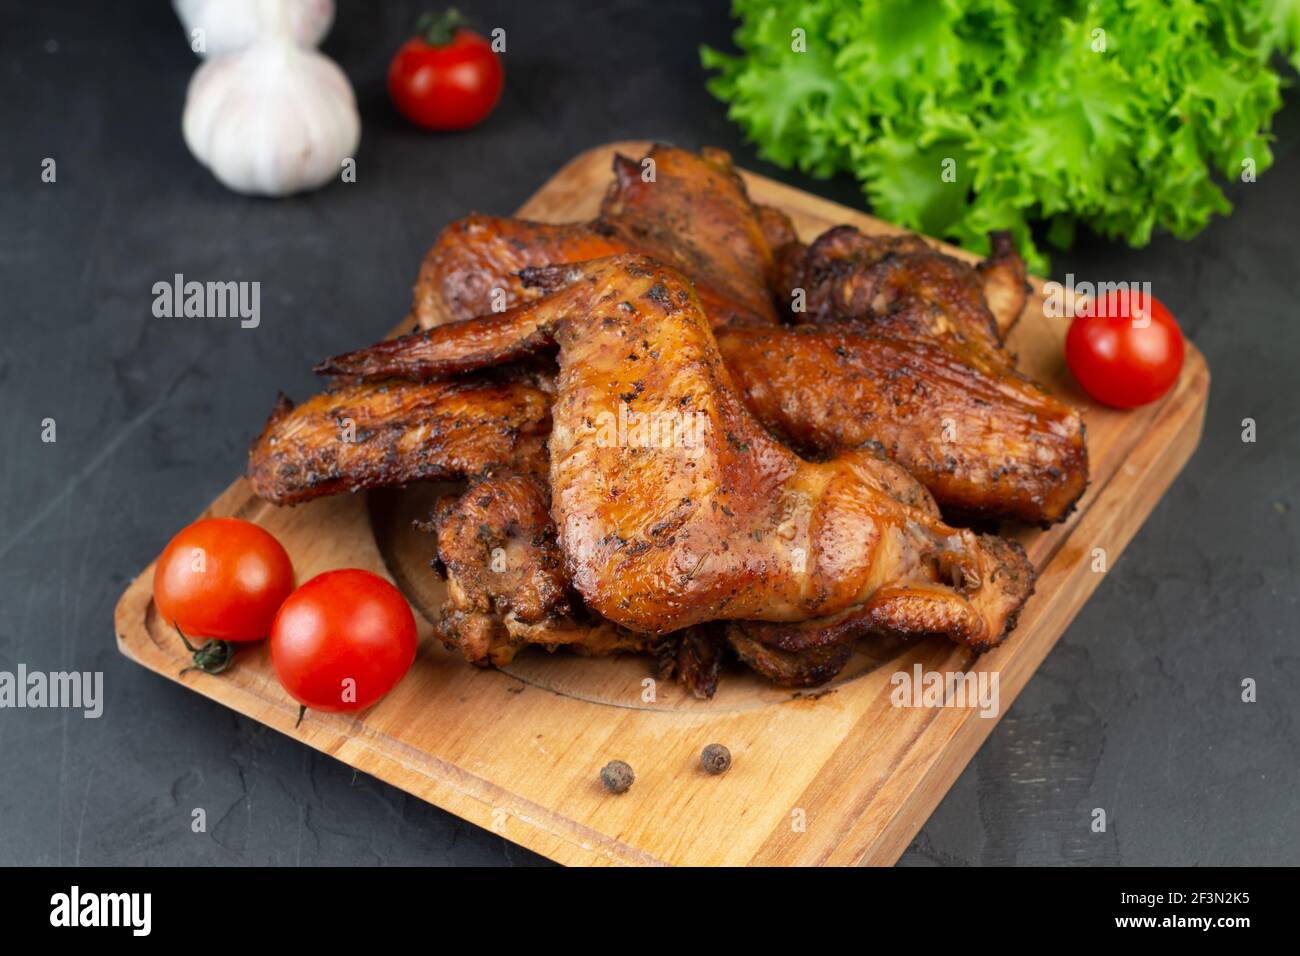 Grilled chicken wings. Low-carb and high-fat food. Menu for carnivore or keto diet Stock Photo